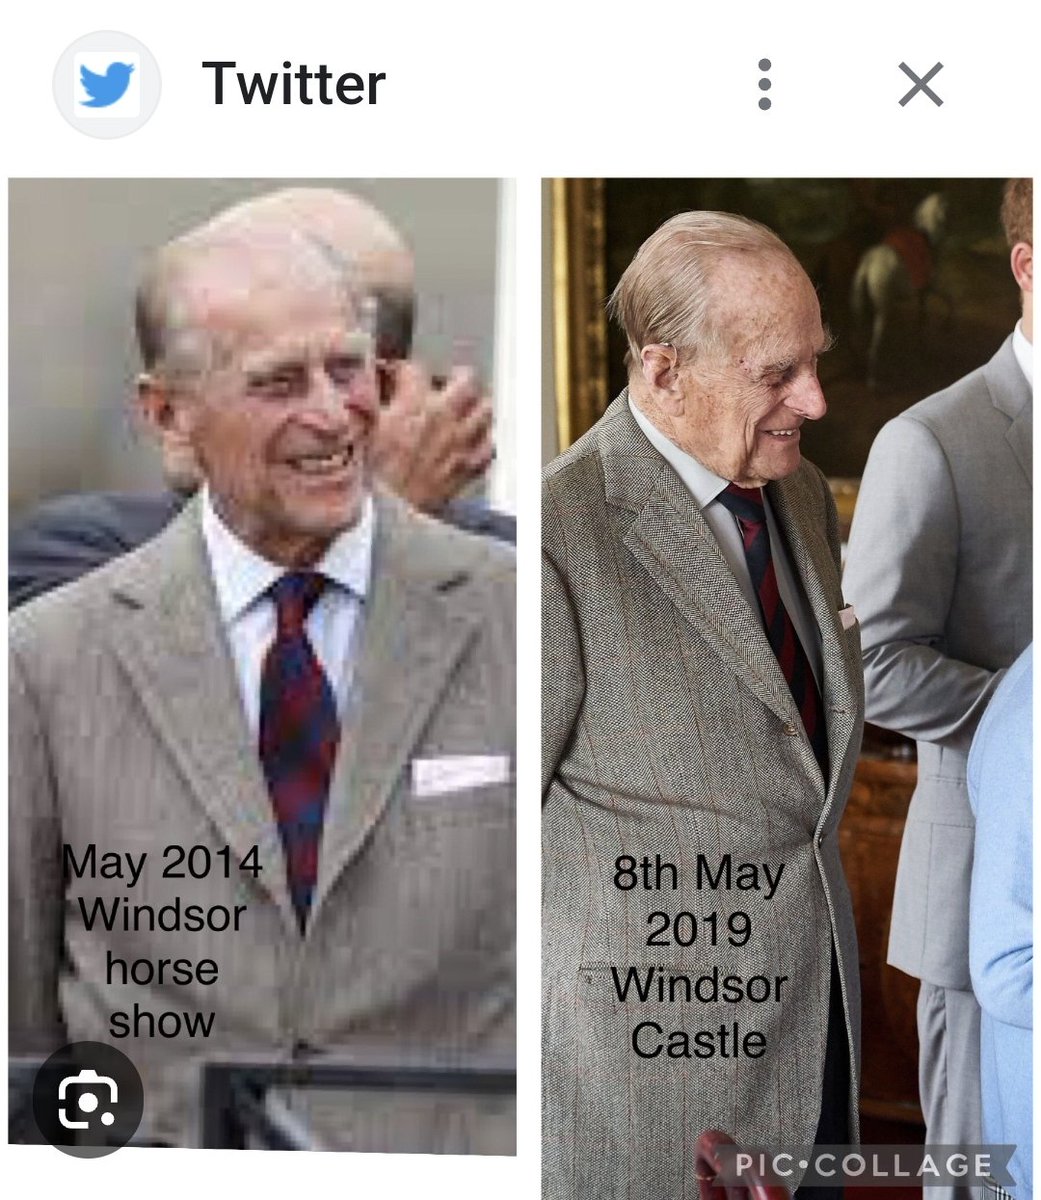 @SkateLikeAGirl8 #sussexbabyscam 
Copied and photoshopped photos from an equestrian event the Queen and Prince Philip attended in Msy 2014 and made up a photo of them meeting Archificial right down the the note in PP left hand pocket👇